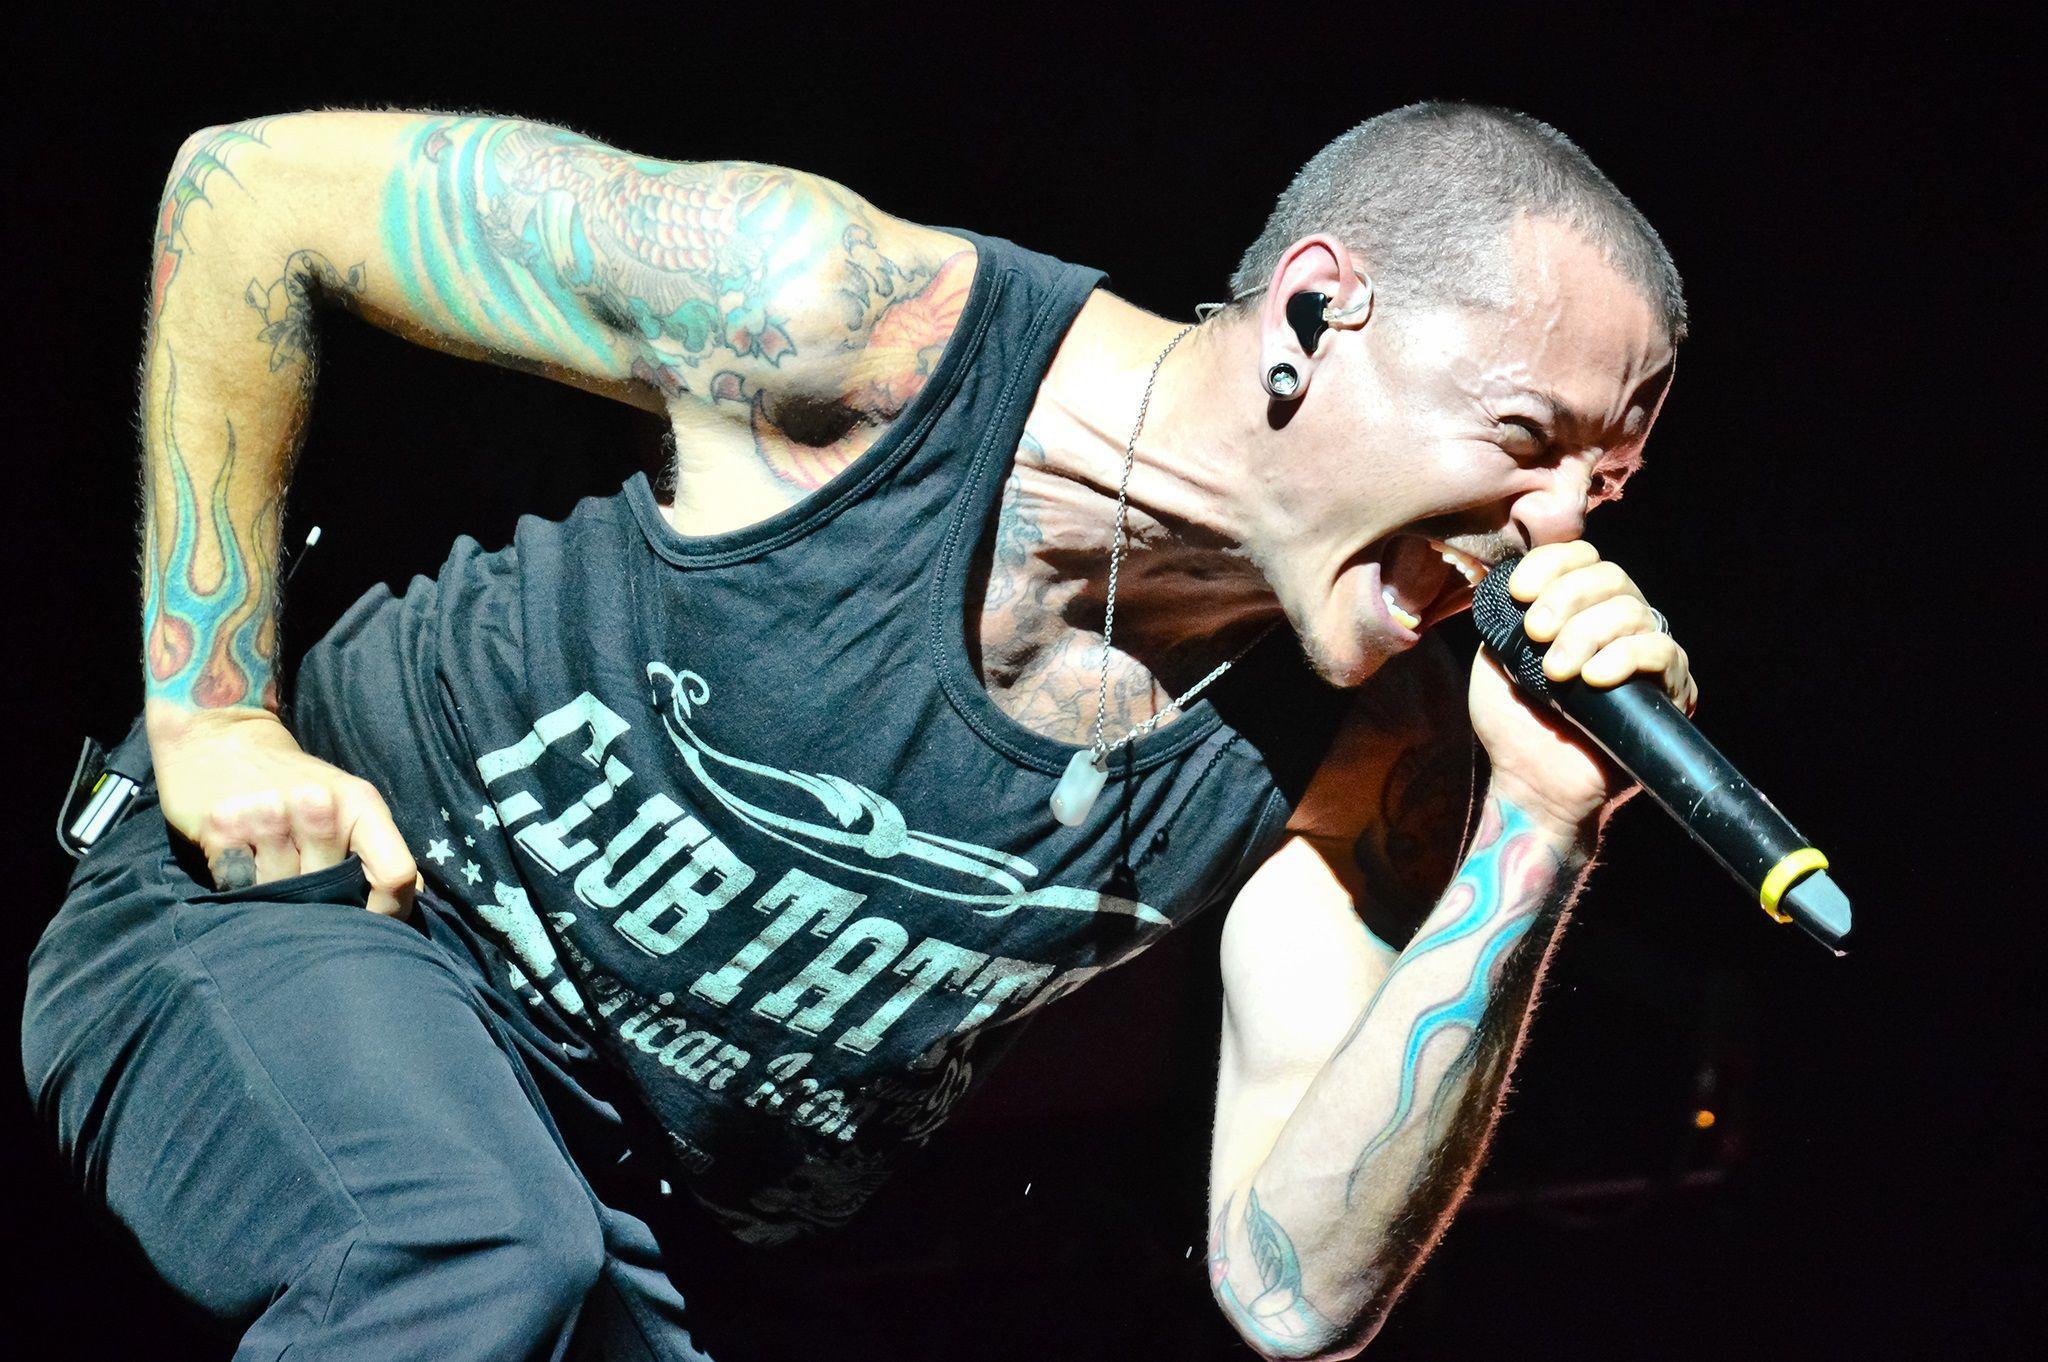 Chester Bennington Wallpaper Image Photo Picture Background